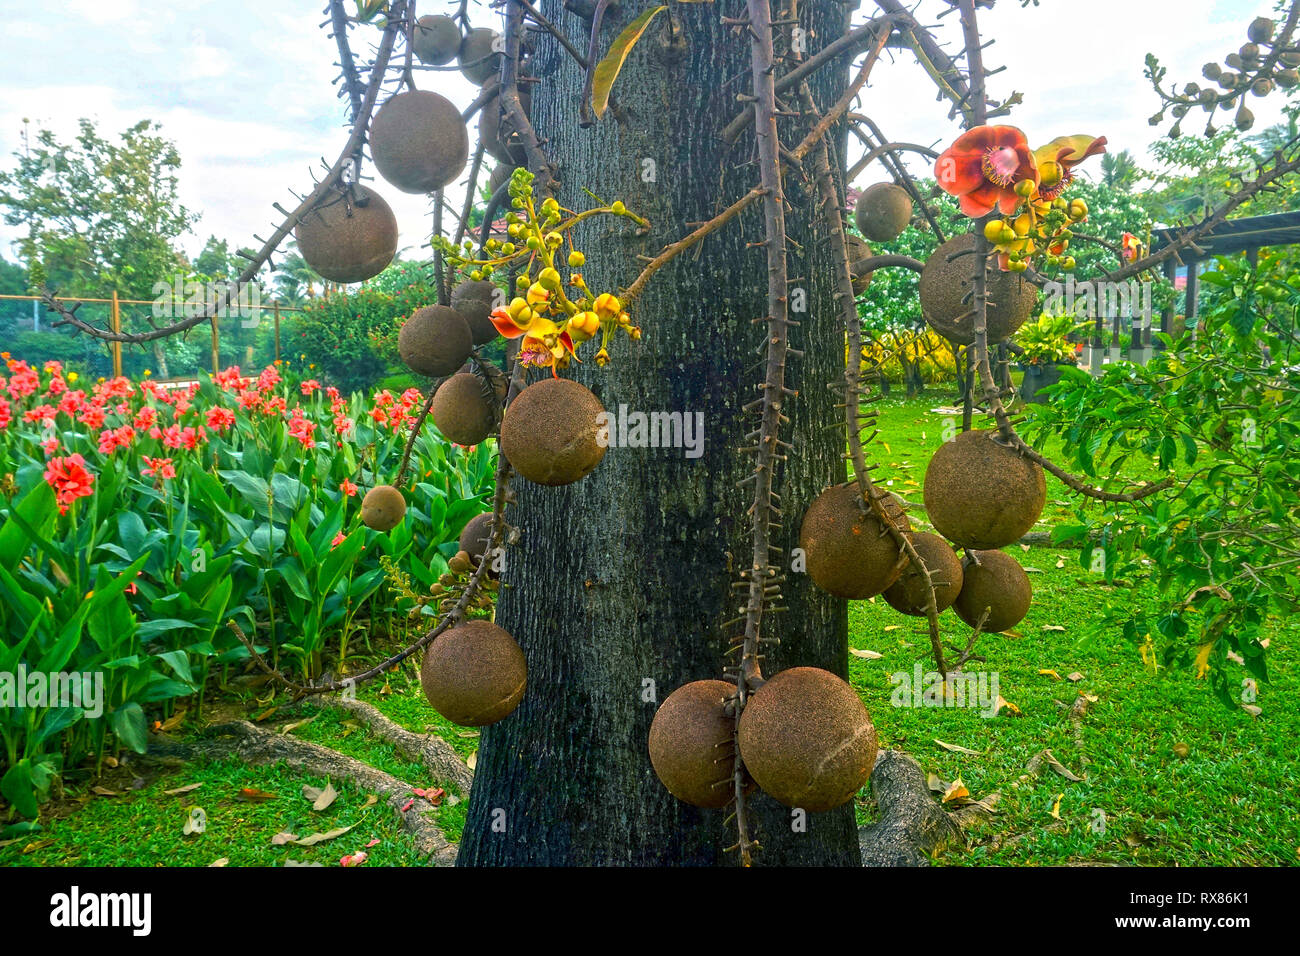 Cannonball tree (Couroupita guianensis Aubl.) bears fruits and blossoms, Koh Samui, Thailand Stock Photo